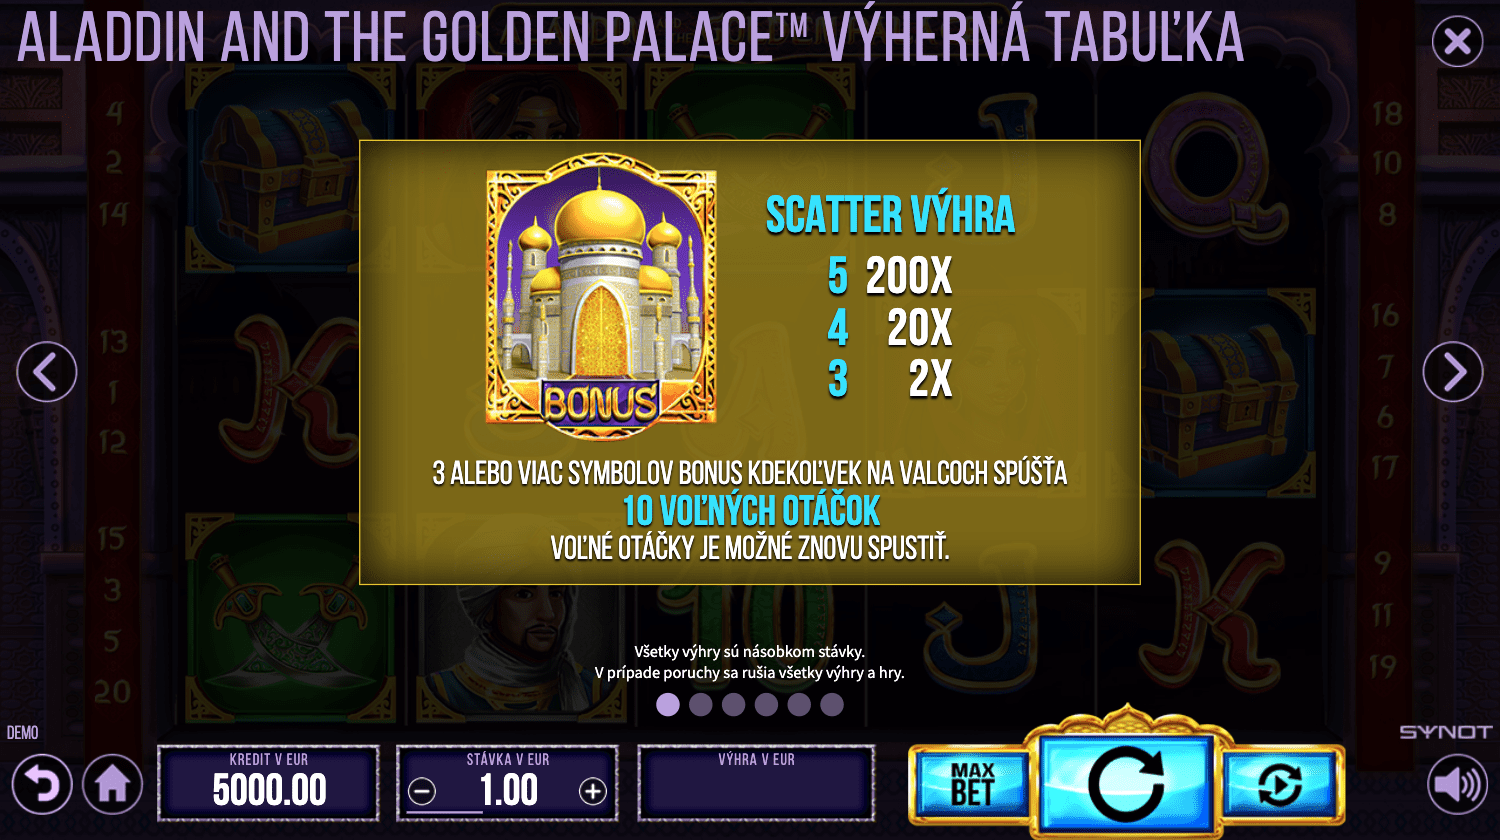 Aladdin And The Golden Palace - Scatter symbol